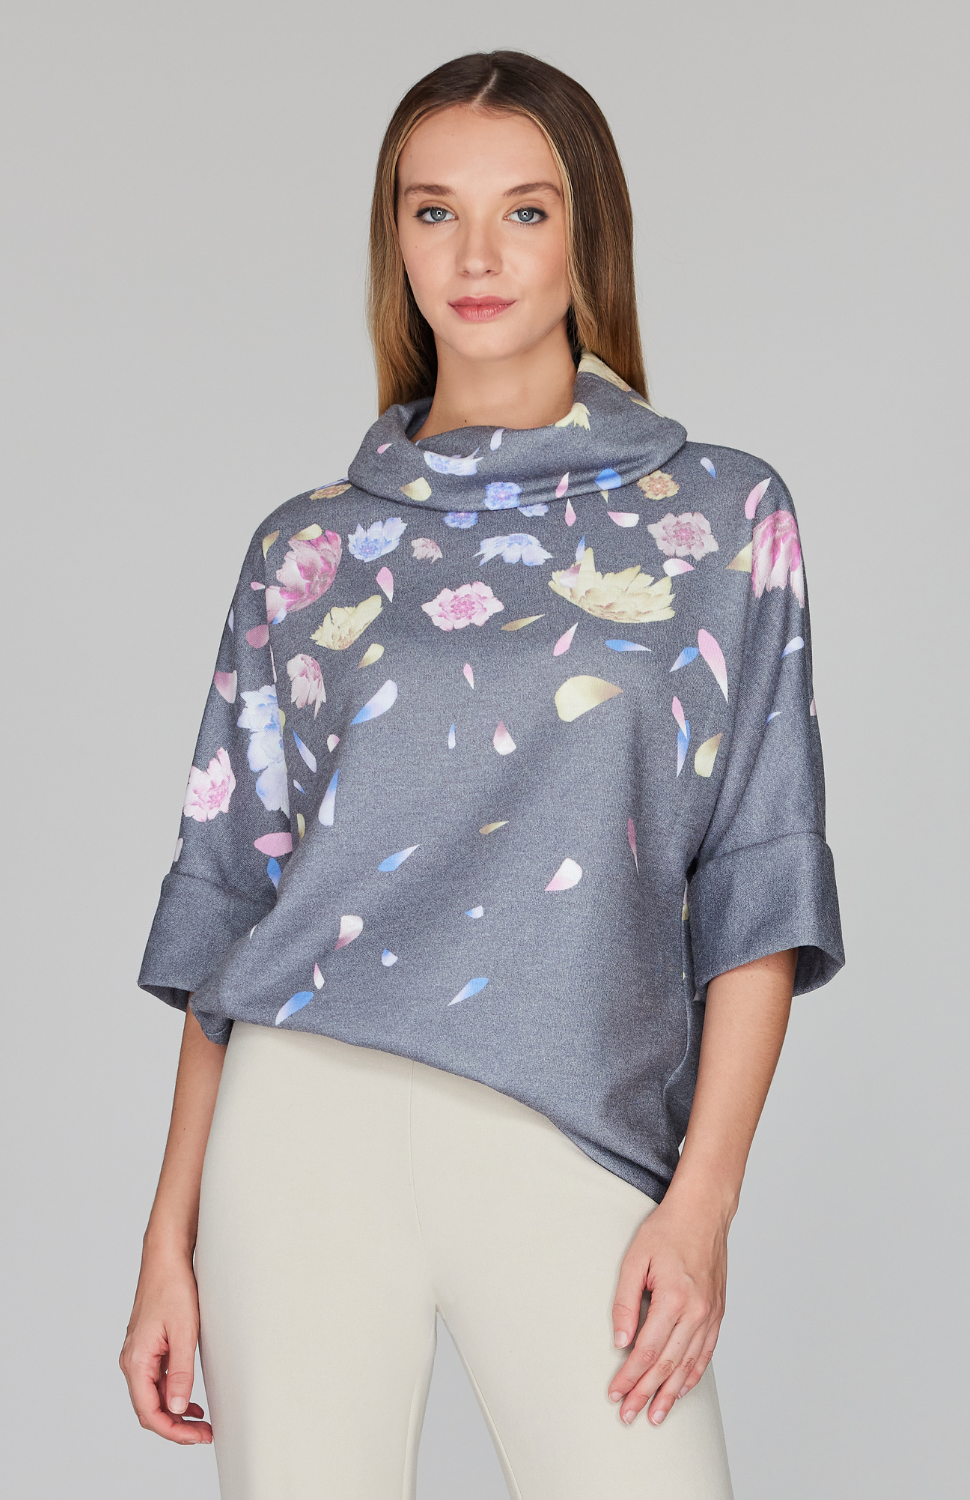 Scattered Blossom Sweater Poncho